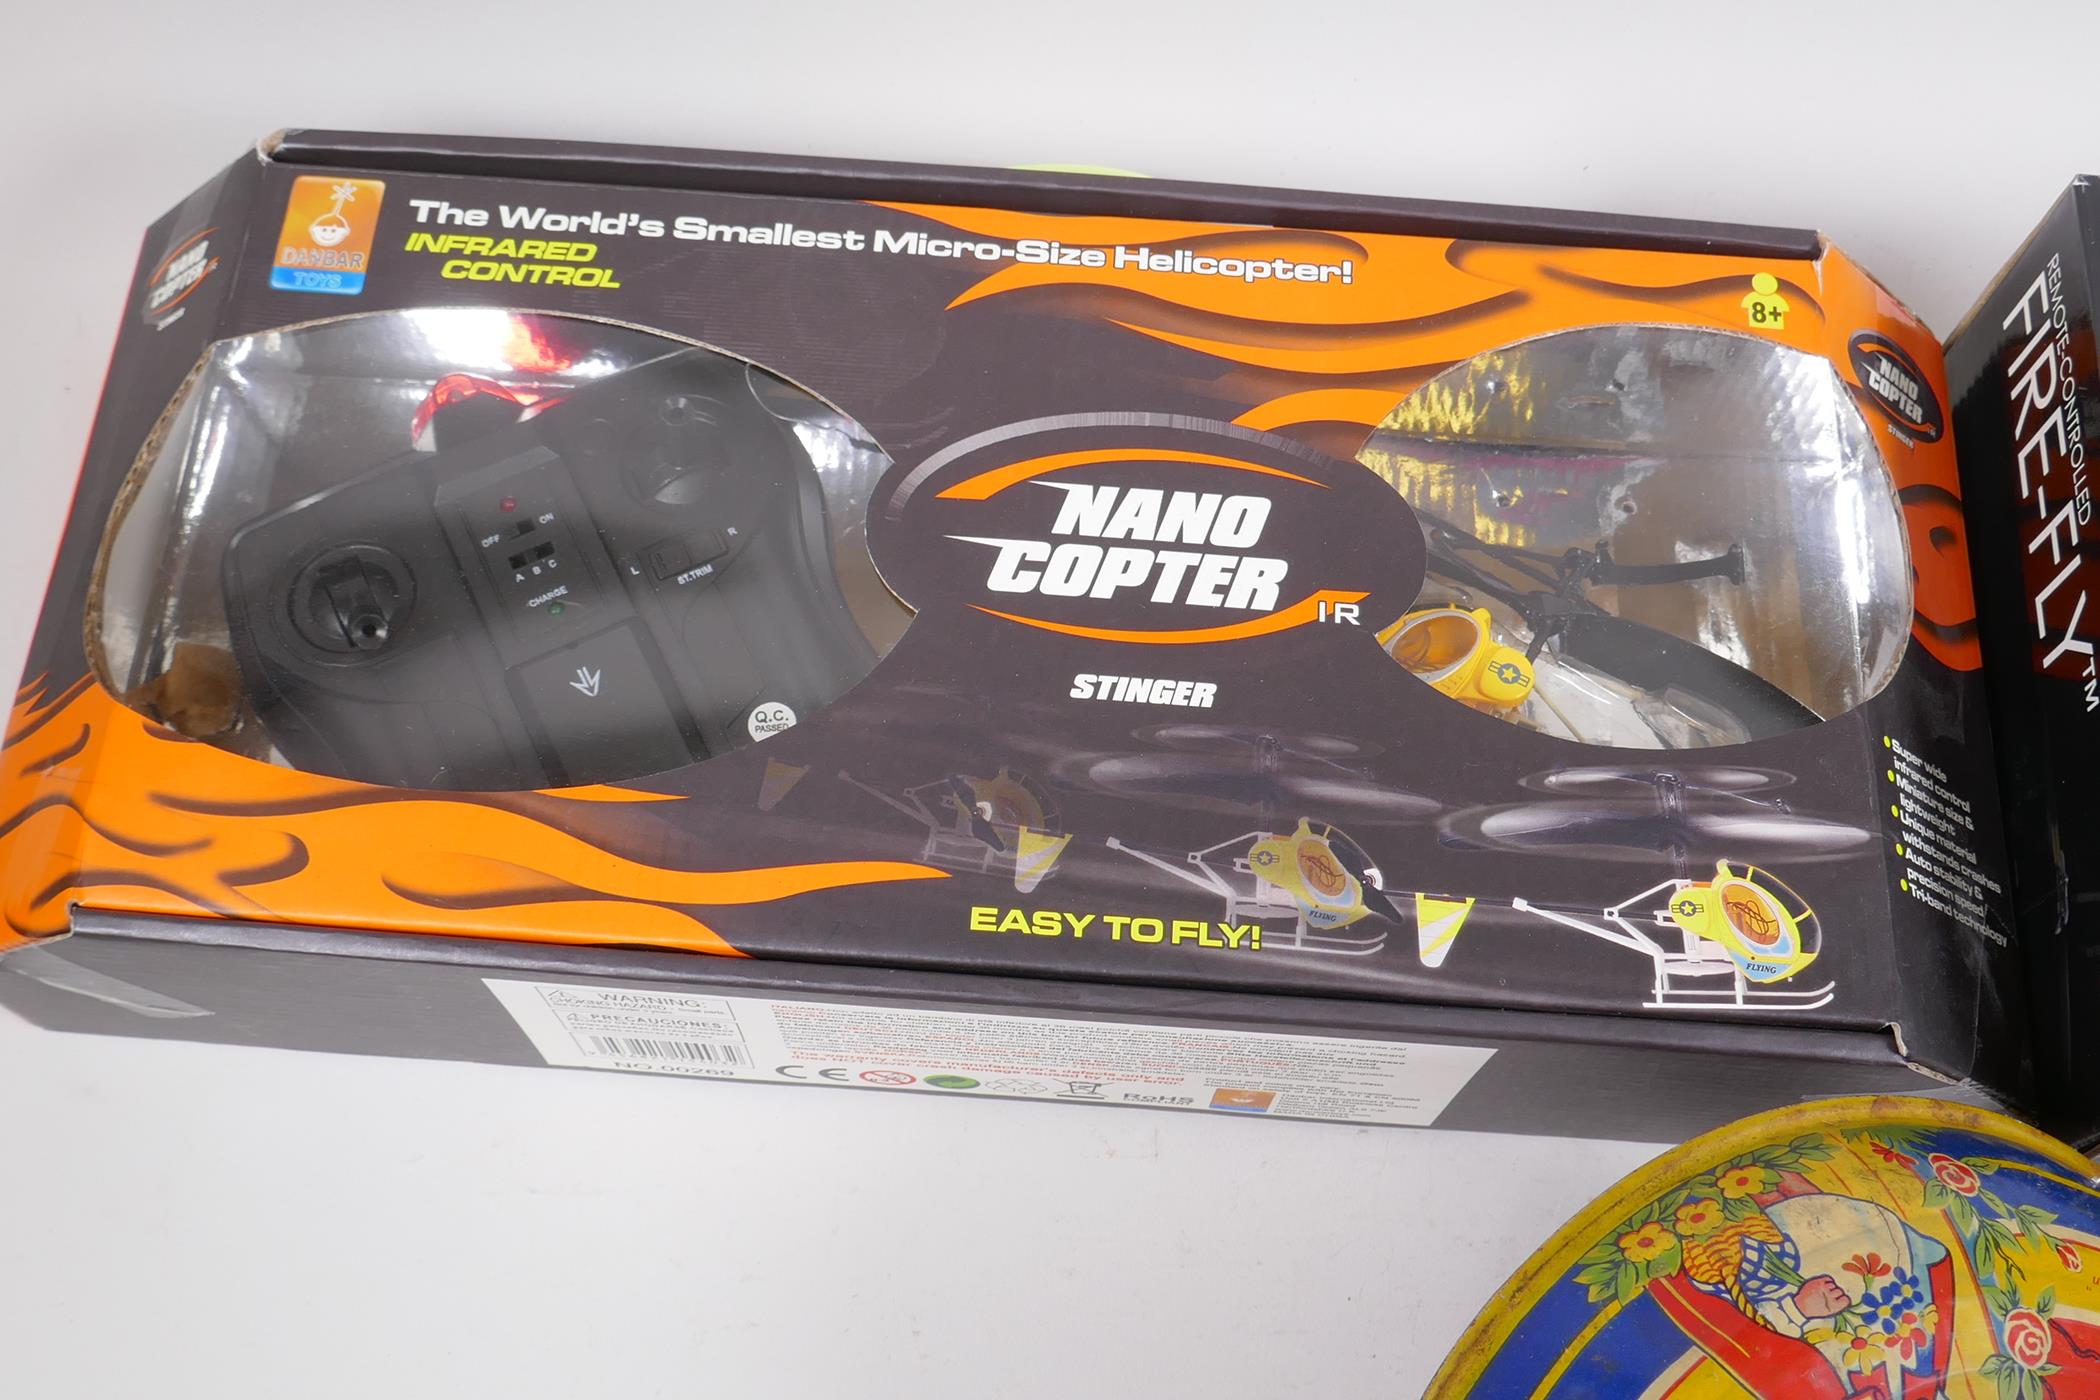 A remote control helicopter, The Nano Copter, in original box, the remote controlled Firefly in - Image 4 of 5